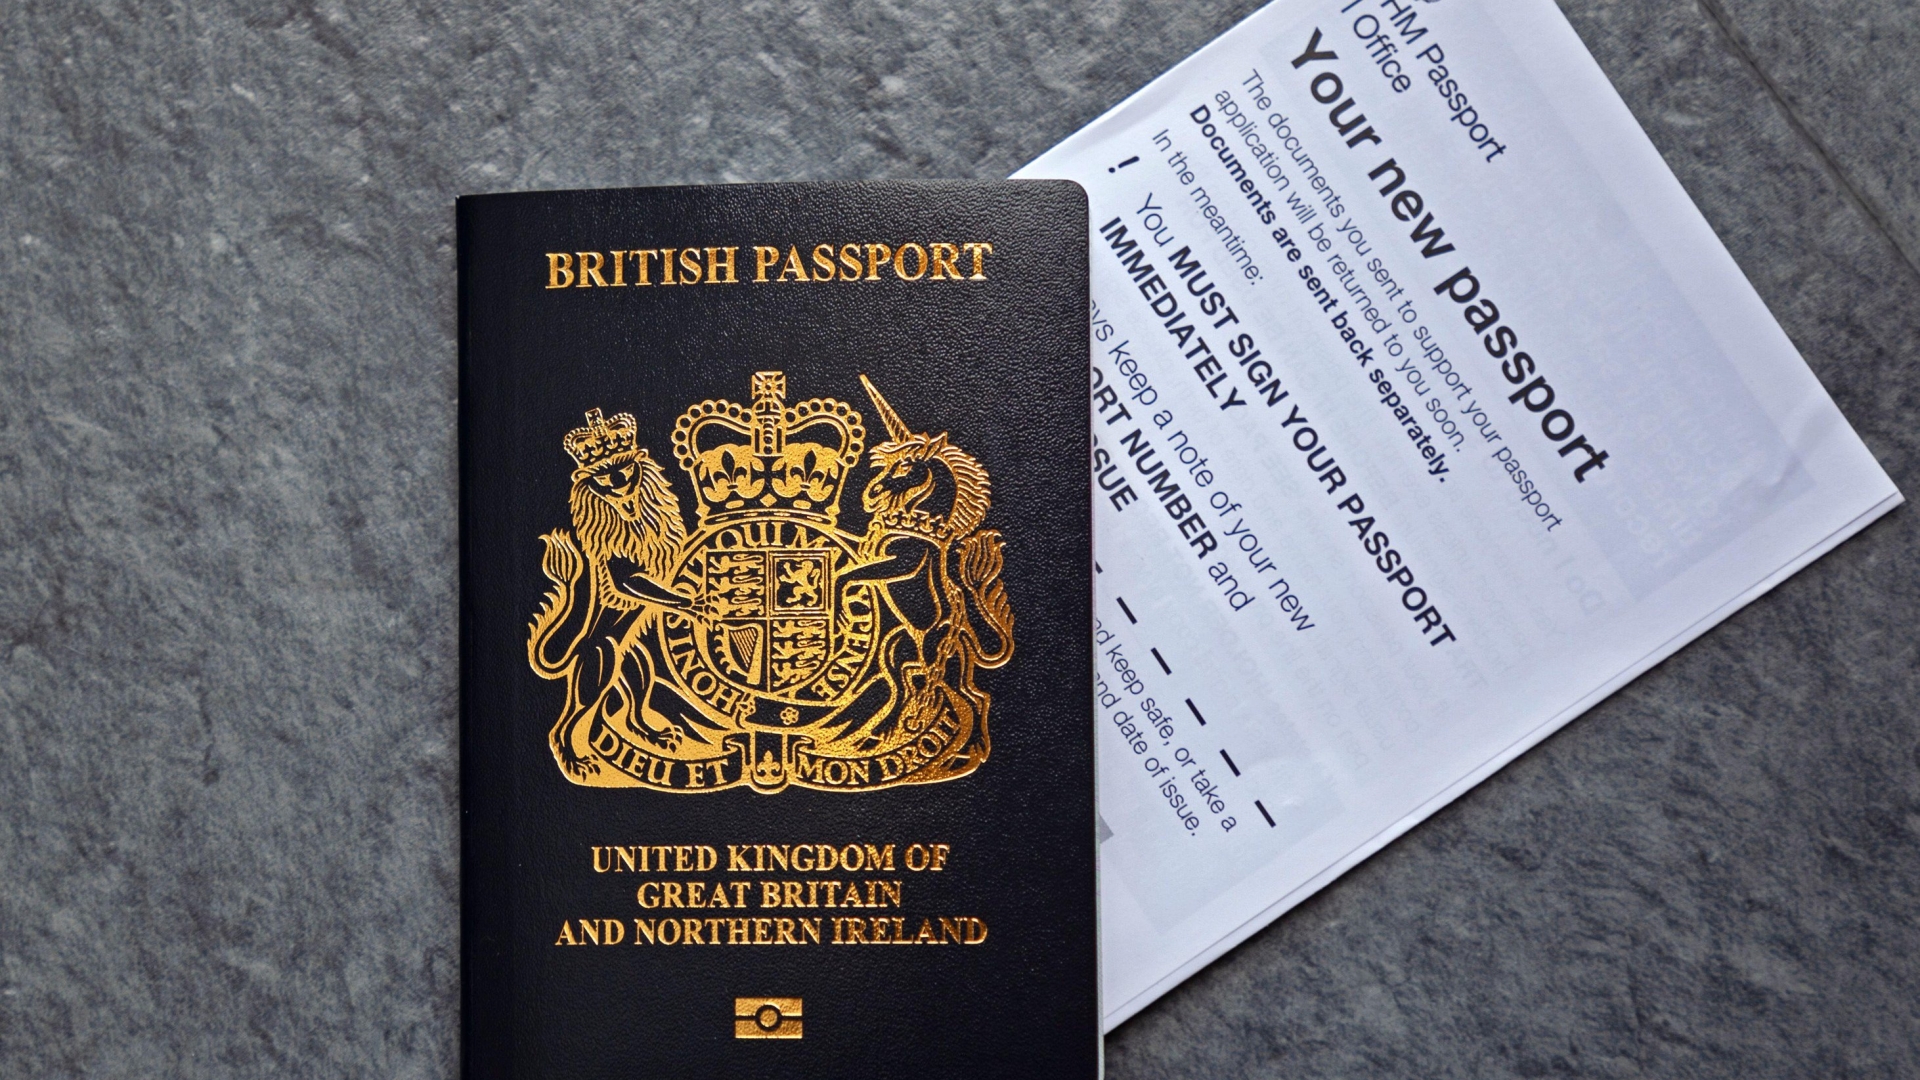 Alert issued about a “ruse” used by desperate travellers in order to avoid passport delays. Experts say it DOESN’T work.